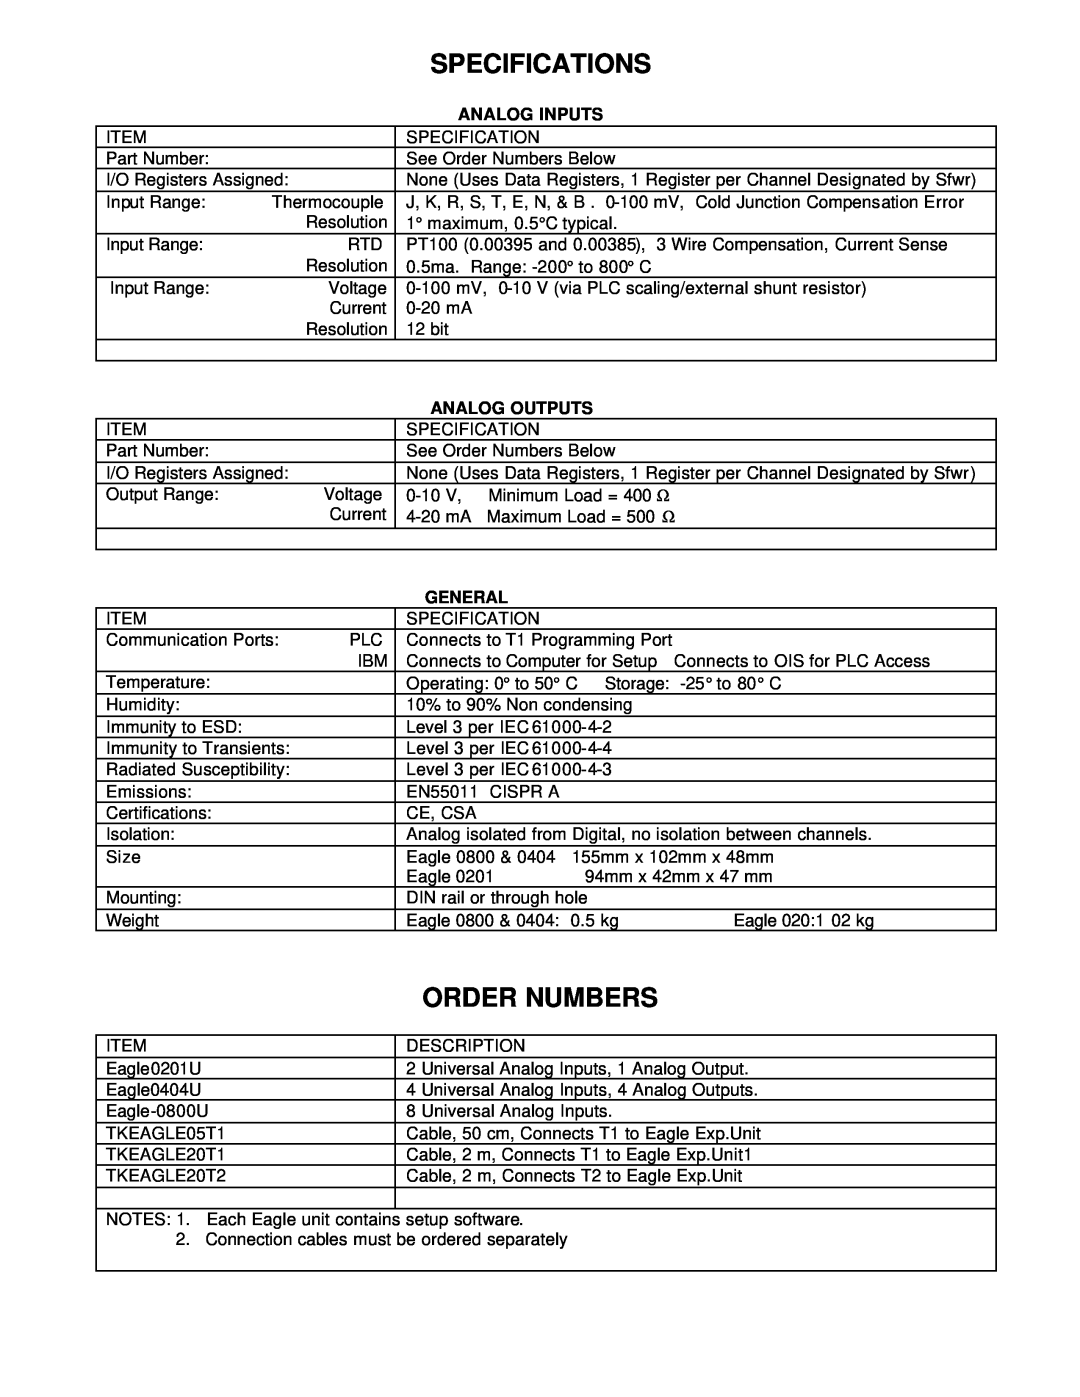 Toshiba T1 Series PLCs manual Specifications, Order Numbers, Analog Inputs, Analog Outputs, General 